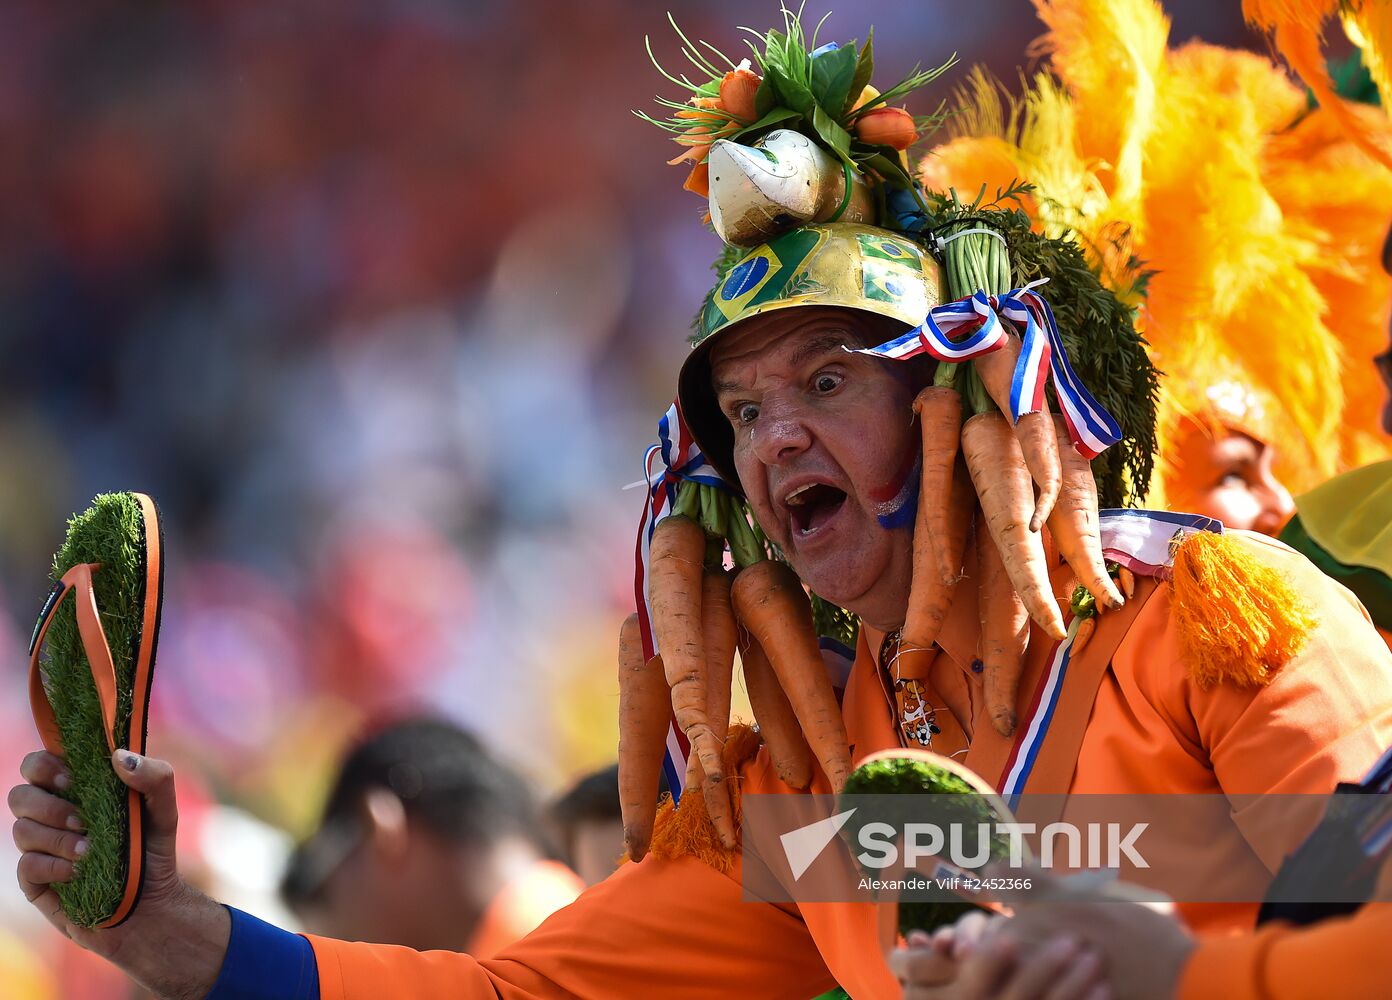 2014 FIFA World Cup. Netherlands vs. Chile